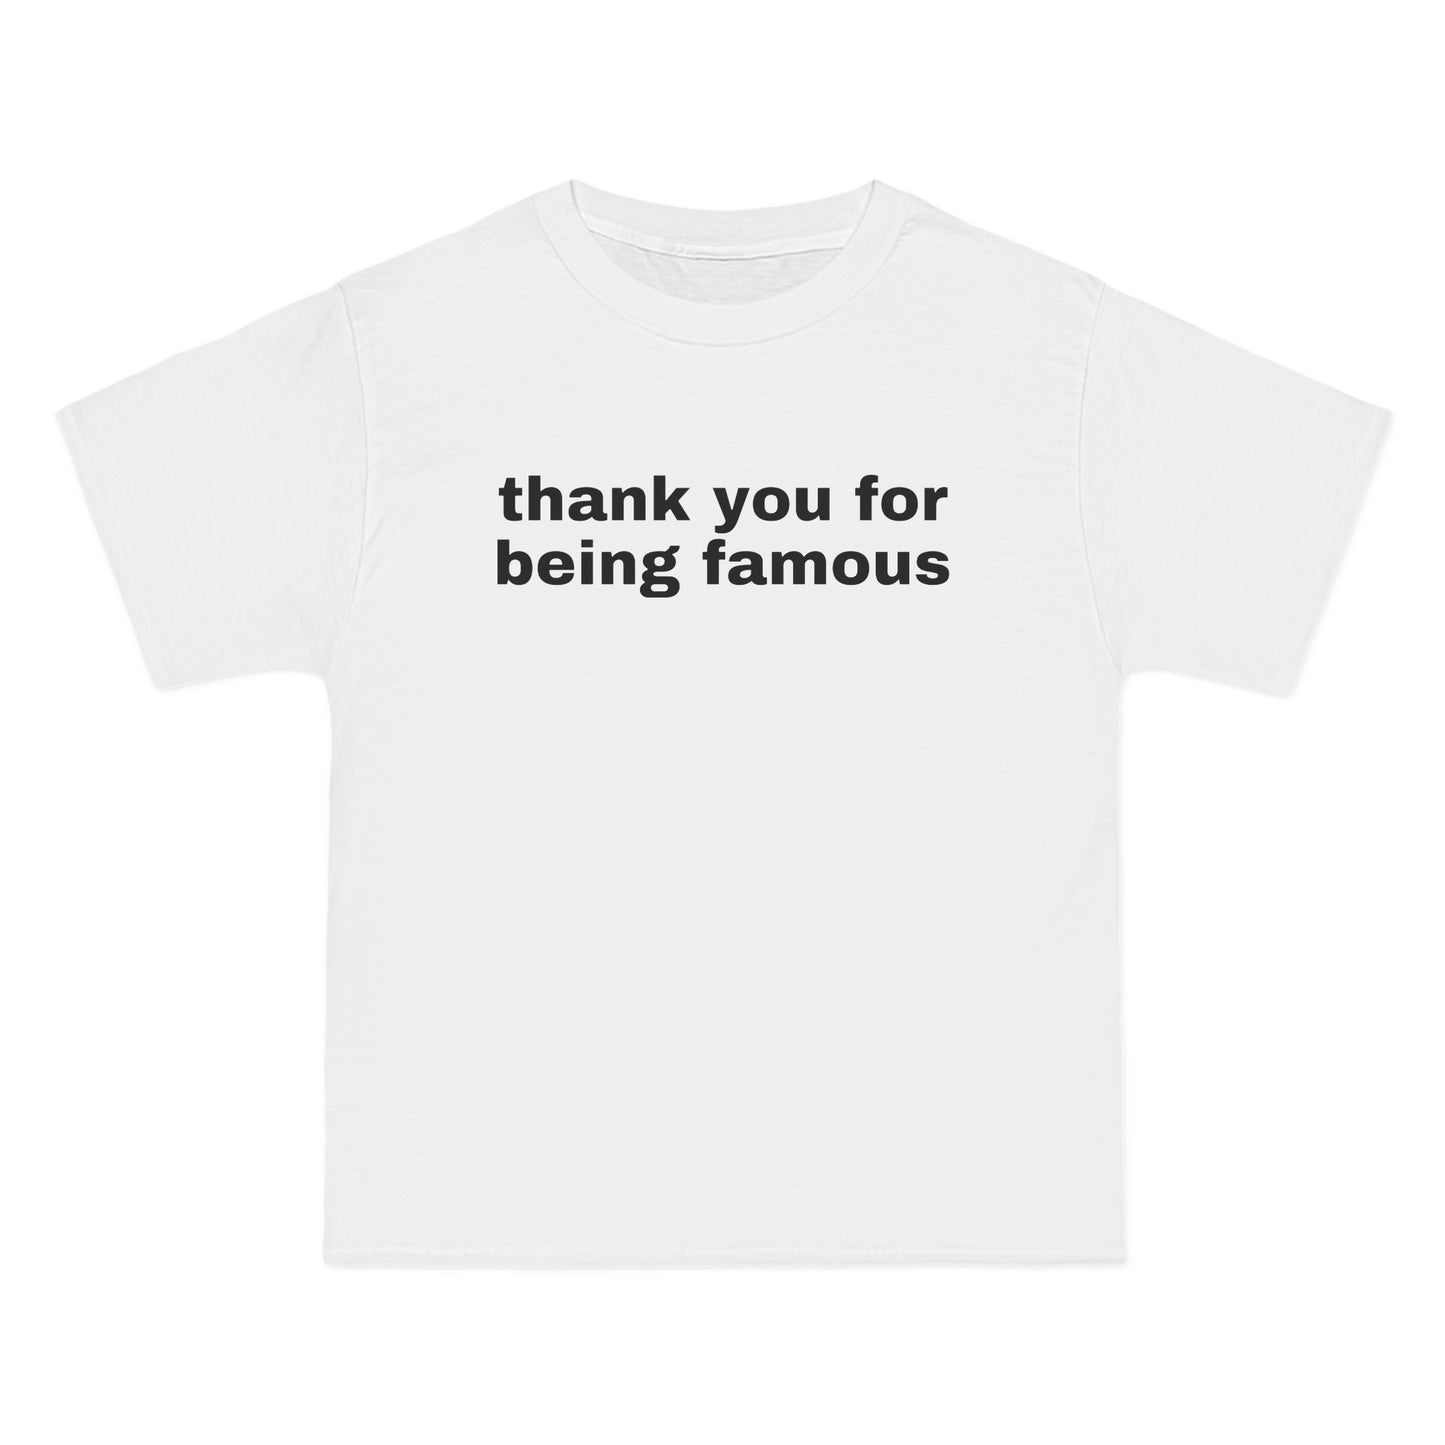 thank you for being famous Tee